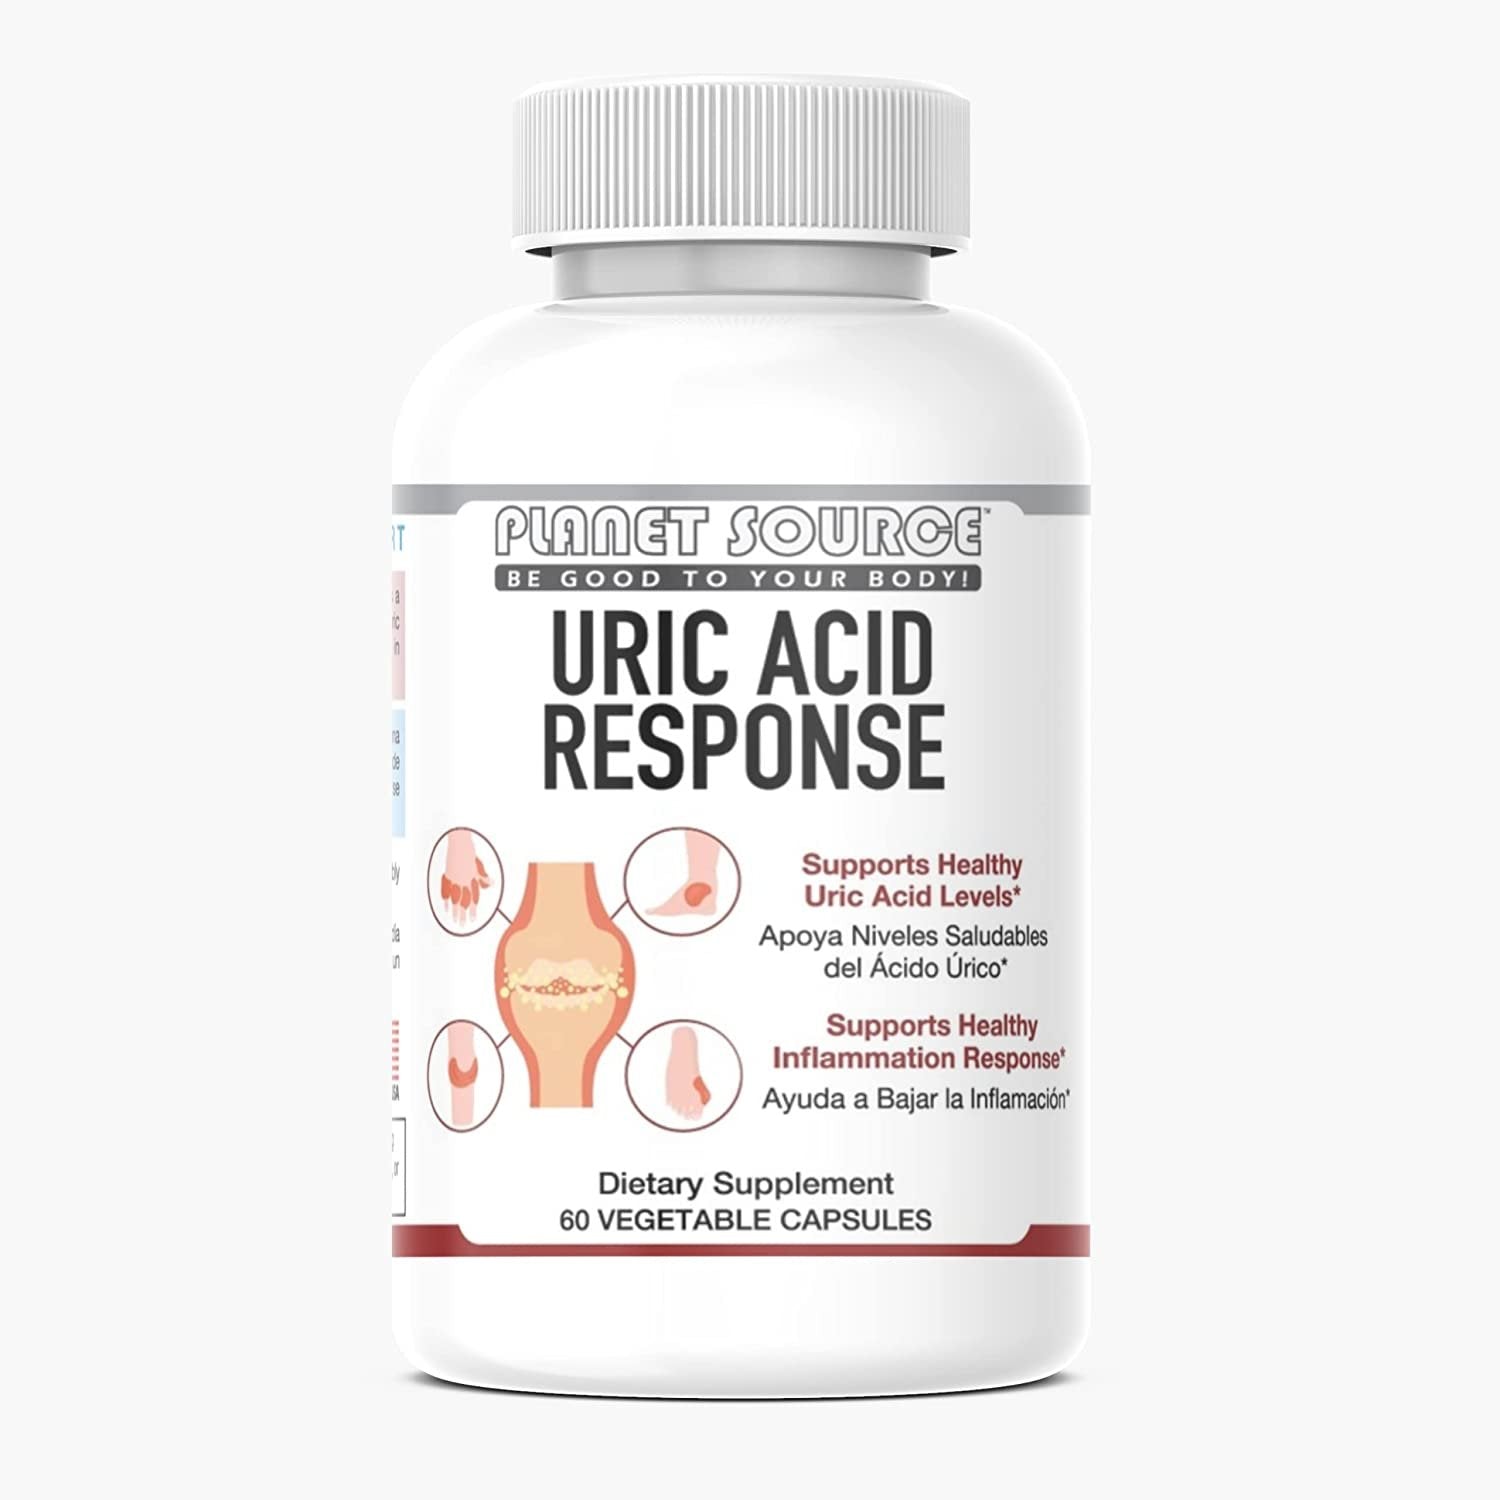 Planet Source Uric Acid Response Dietary Supplement - 60 Count Capsules 30 Servings Per Container - Uric Acid Cleanse Supplement for Kidney and Joint Support - Gluten Free, Vegan Friendly